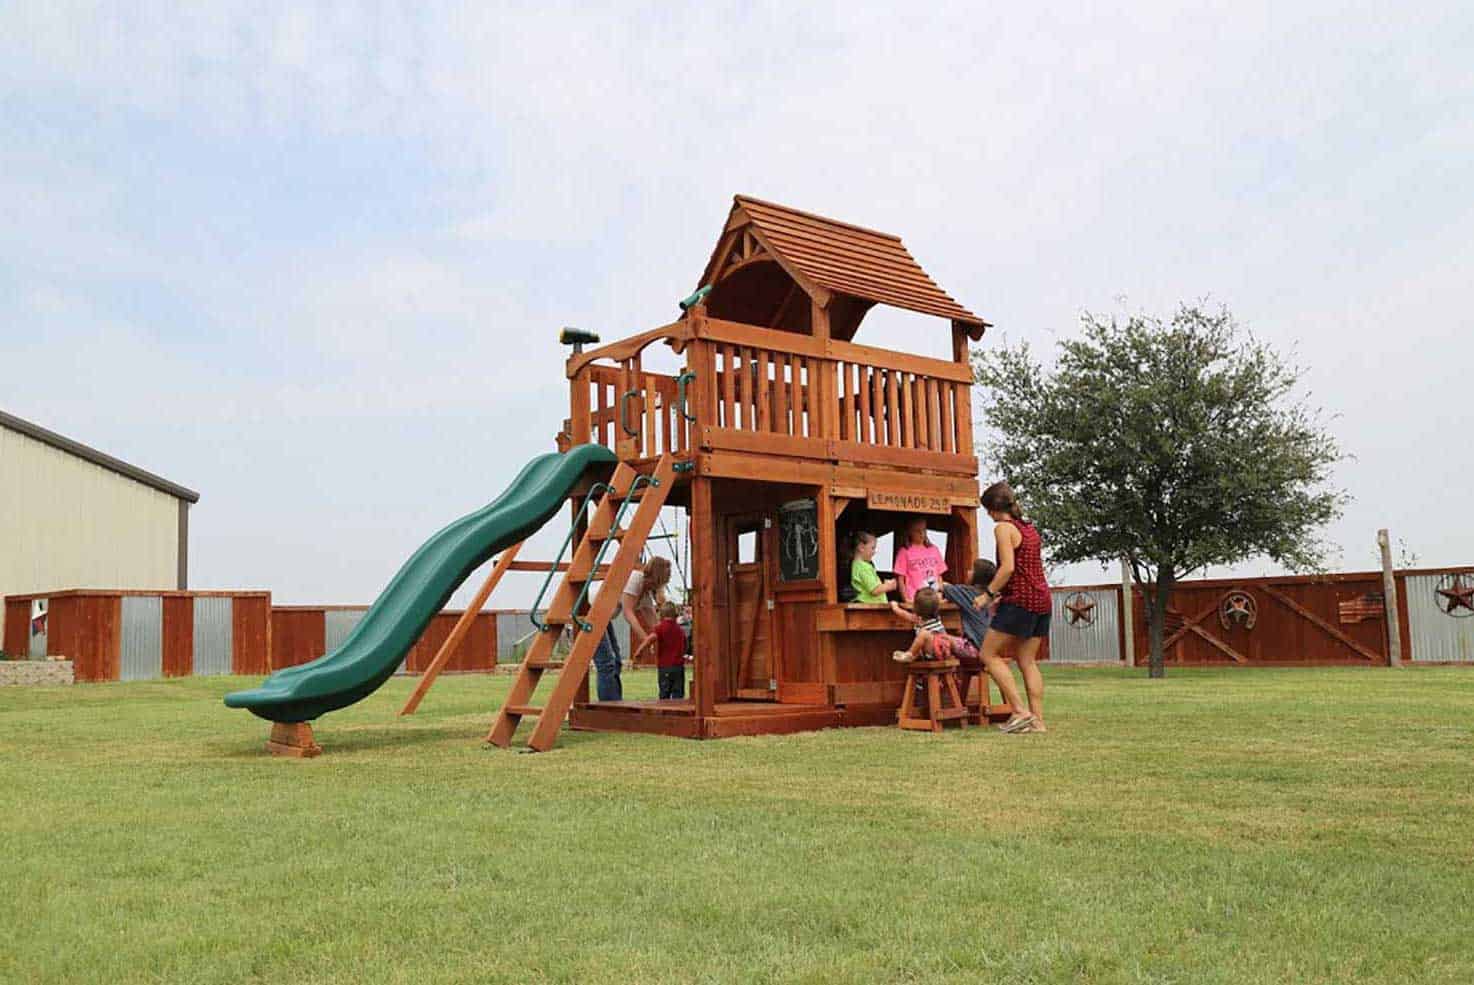 Trophy Club, Texas, maverick swing set with lower cabin and kids playing at the lemonade counter, and swinging on the swings